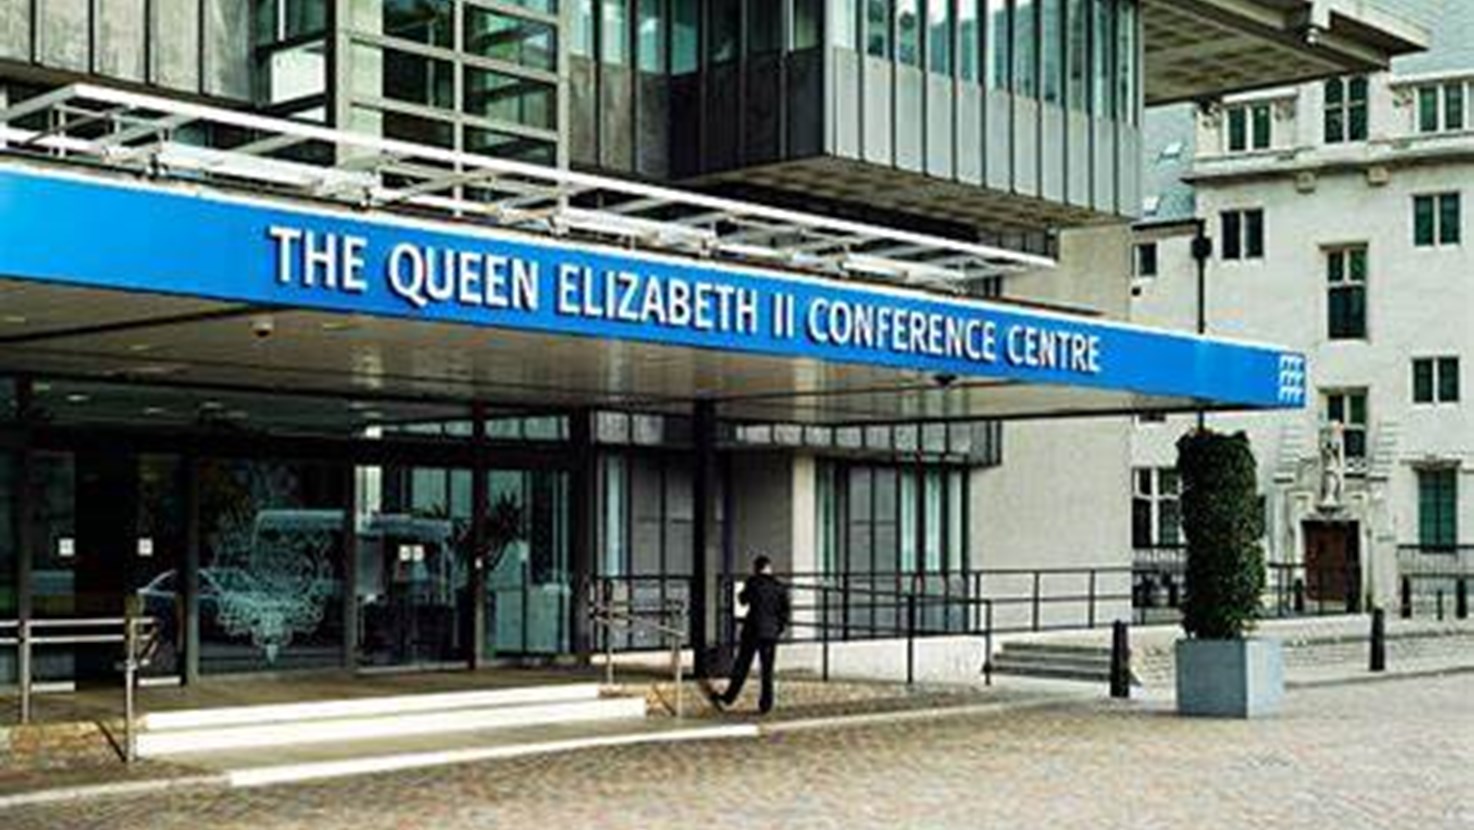 View all of the events and meetings that DPCC Phil Clark attended or hosted at the QEII Conference Centre in 2023